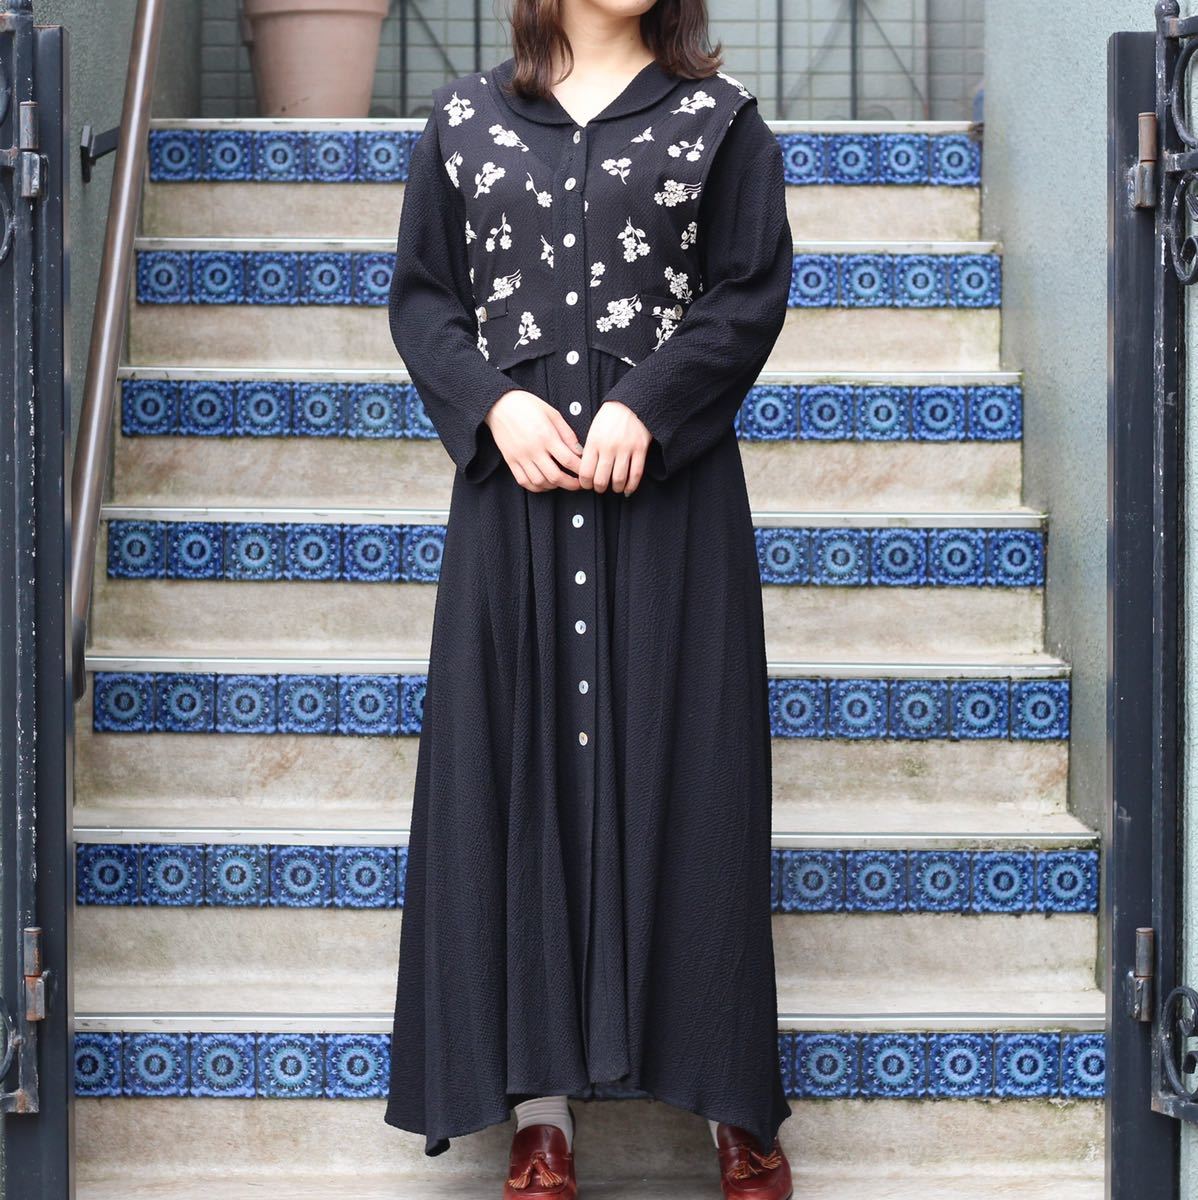 USA VINTAGE Ultra Dress EMBROIDERY LAYARD DESIGN LONG ONE PIECE/アメリカ古着刺繍レイヤードデザインロングワンピース